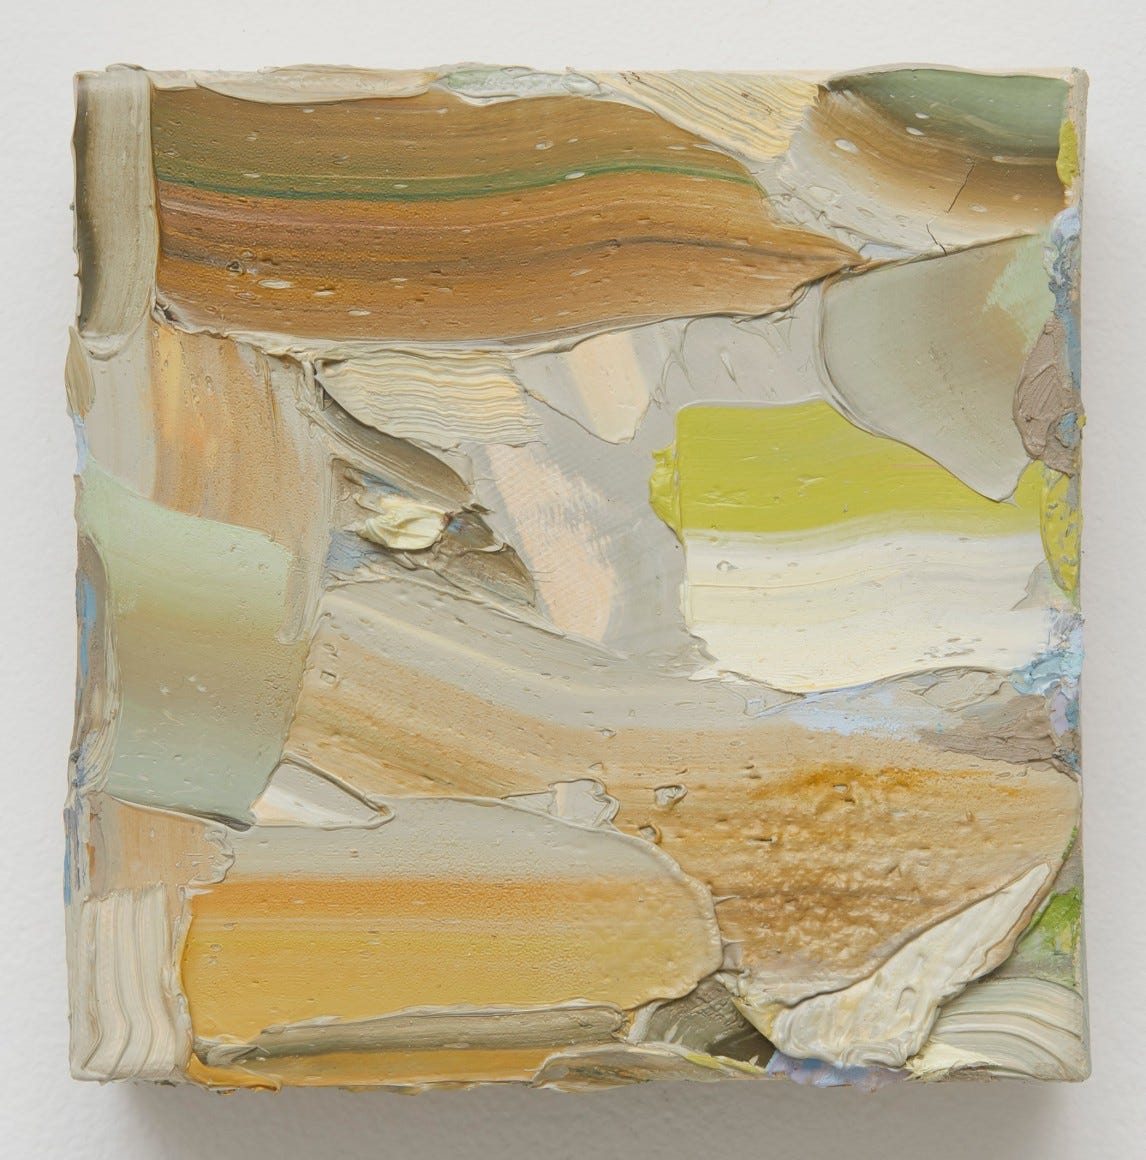 A small abstract painting with thick layers of brush strokes and pallet knife gestures, with areas of pale green-browns, creams, greys, and a stroke of lime green.